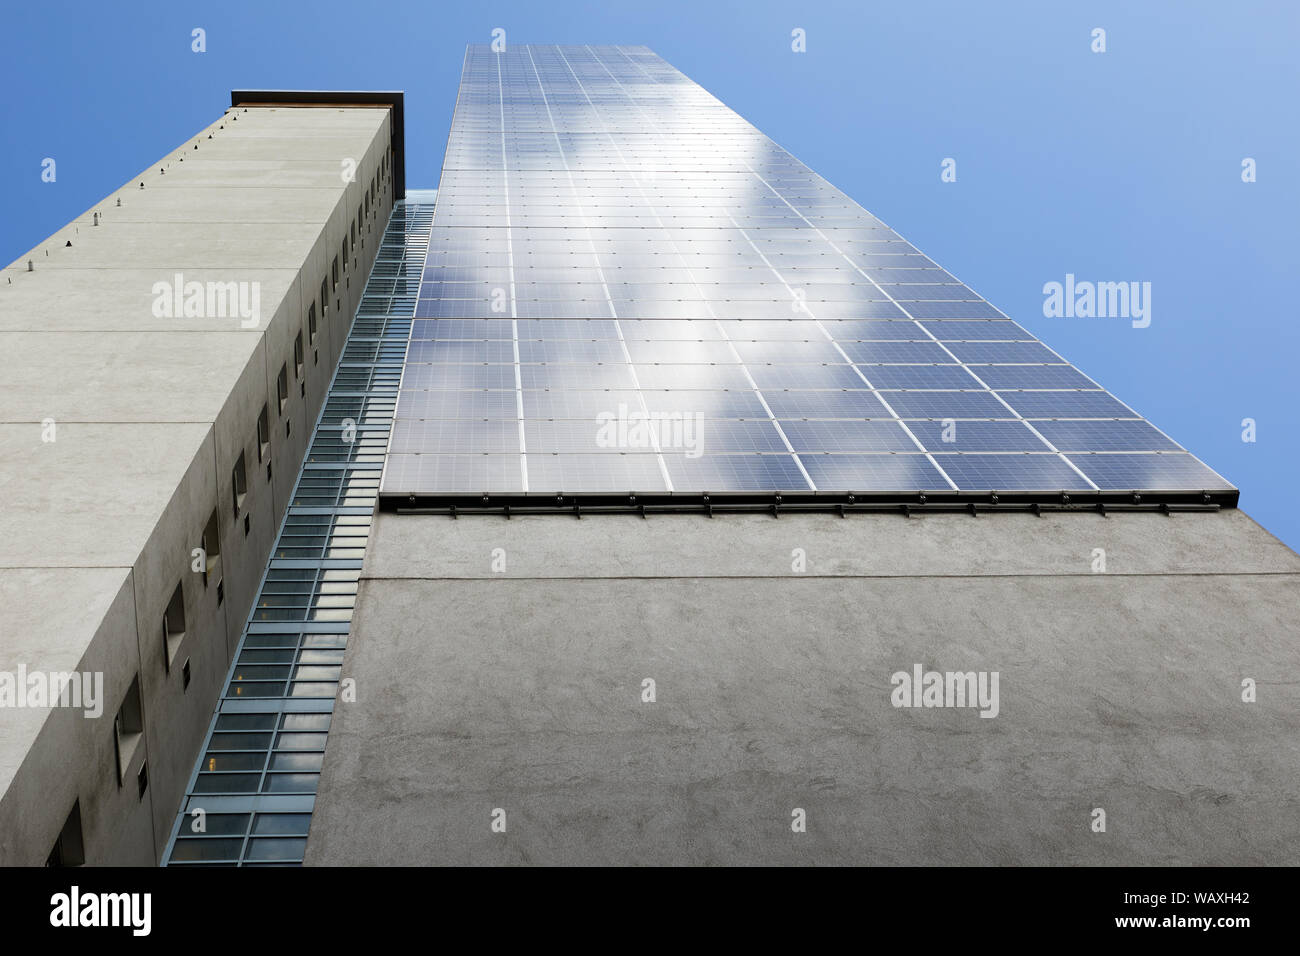 London, U.K. - August 17, 2019: Solar photovoltaic cells fitted to the side of high-rise local-authority residential tower block. Stock Photo